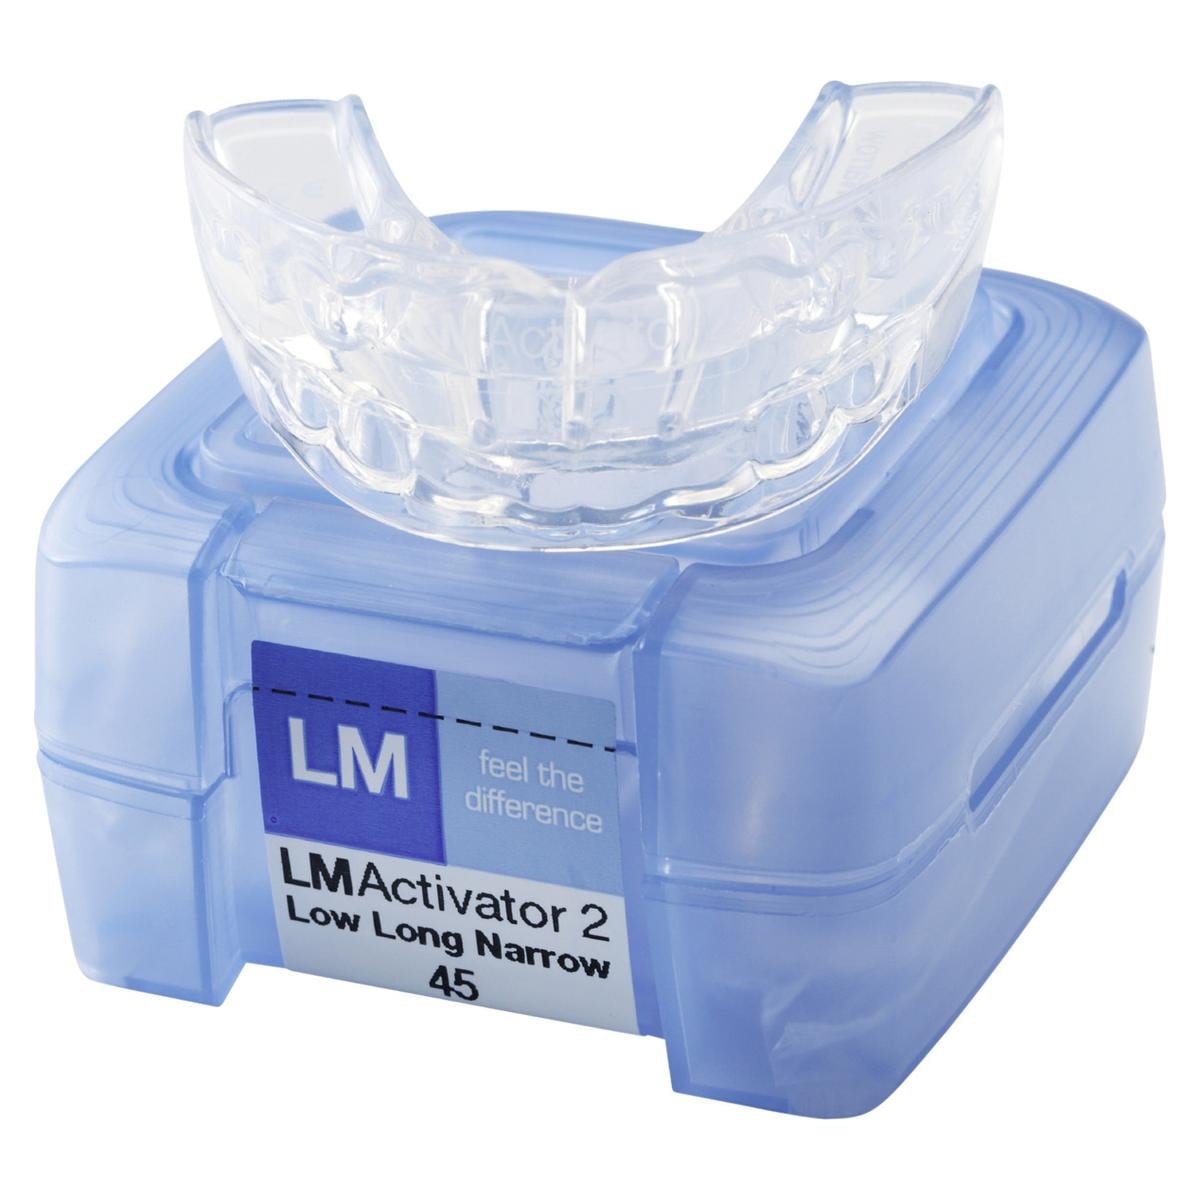 LM Activator 2 Low Long - Narrow - Size 40 (94240LLN)